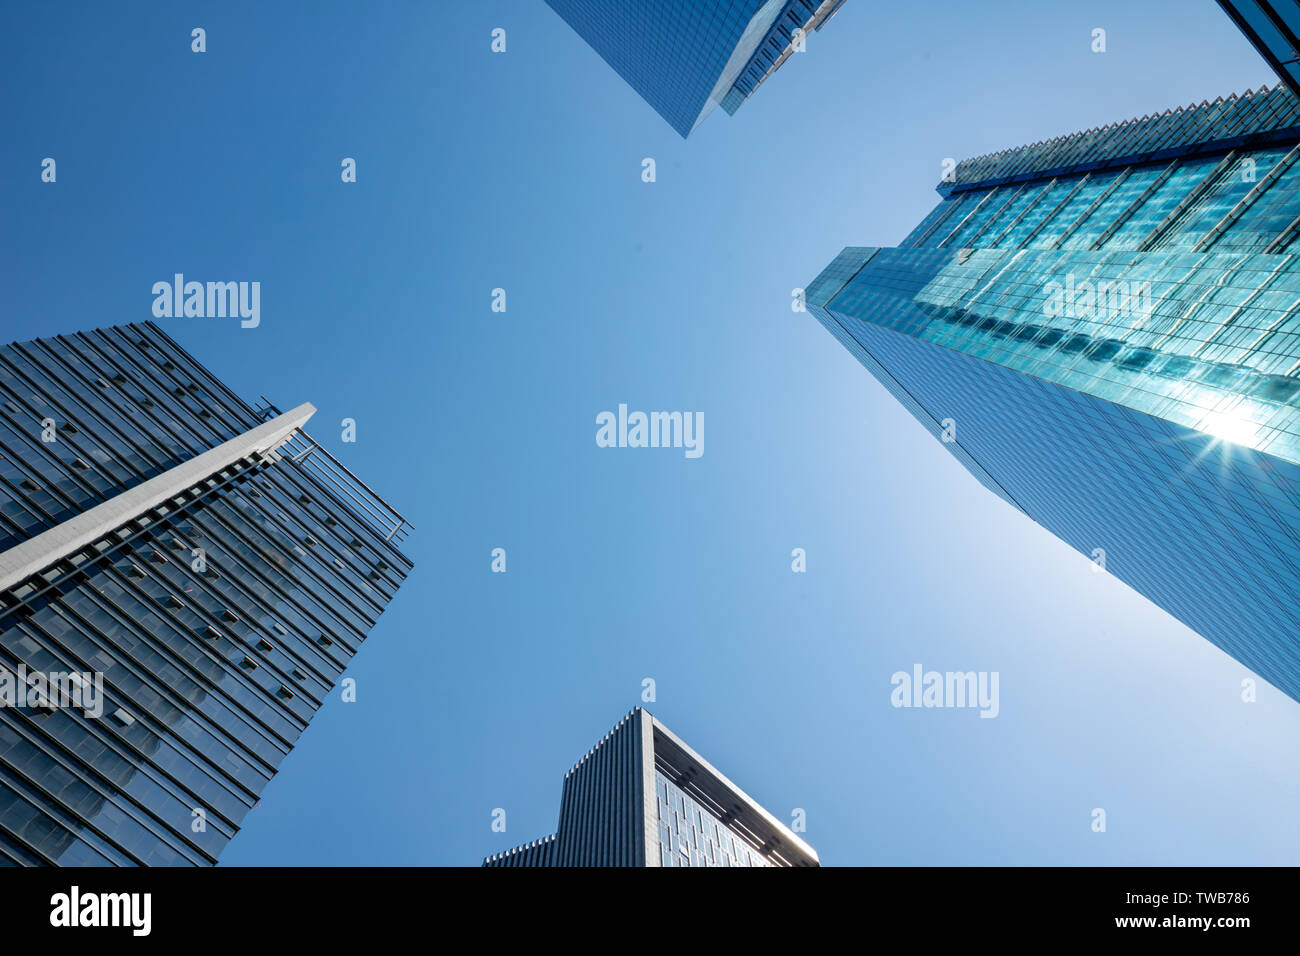 High-rise buildings in Suzhou Stock Photo - Alamy